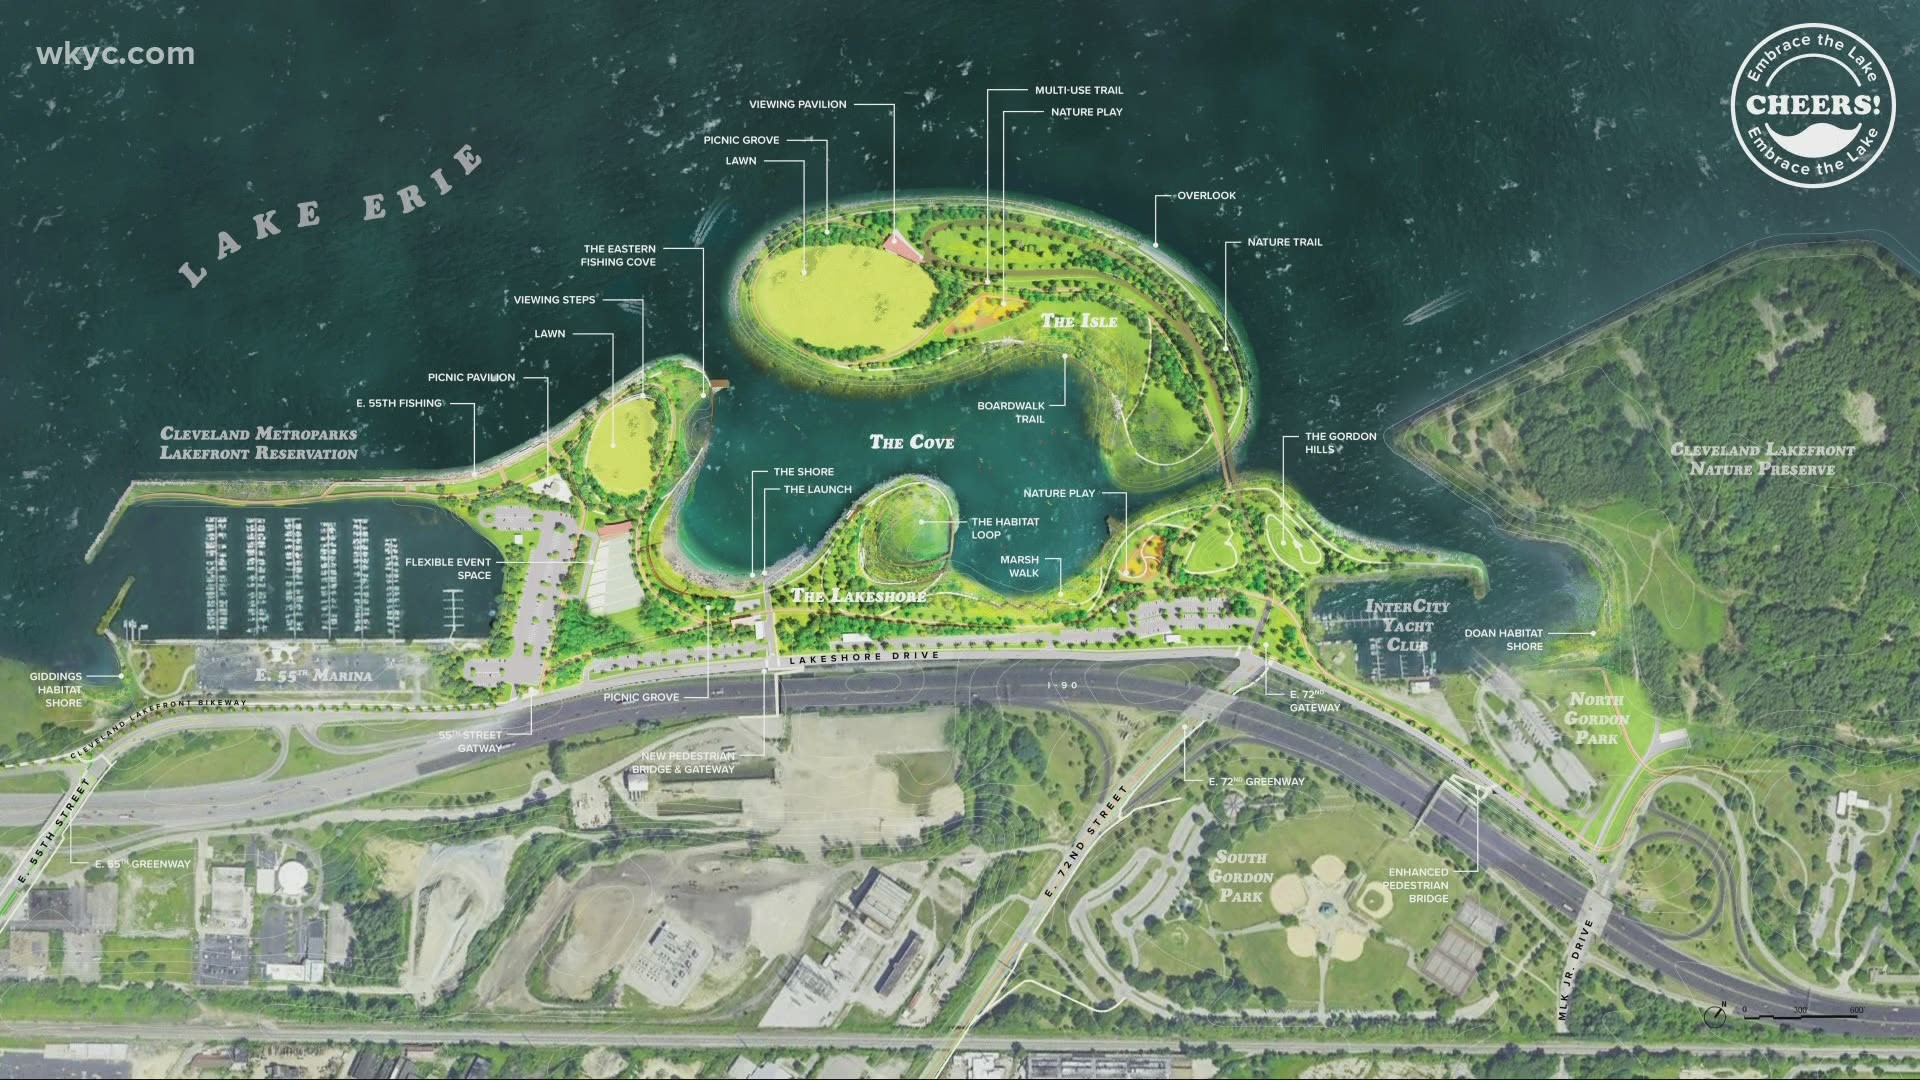 Sediment dredged from the bottom of the Cuyahoga River would create the new parkland, which would be connected by various trails.